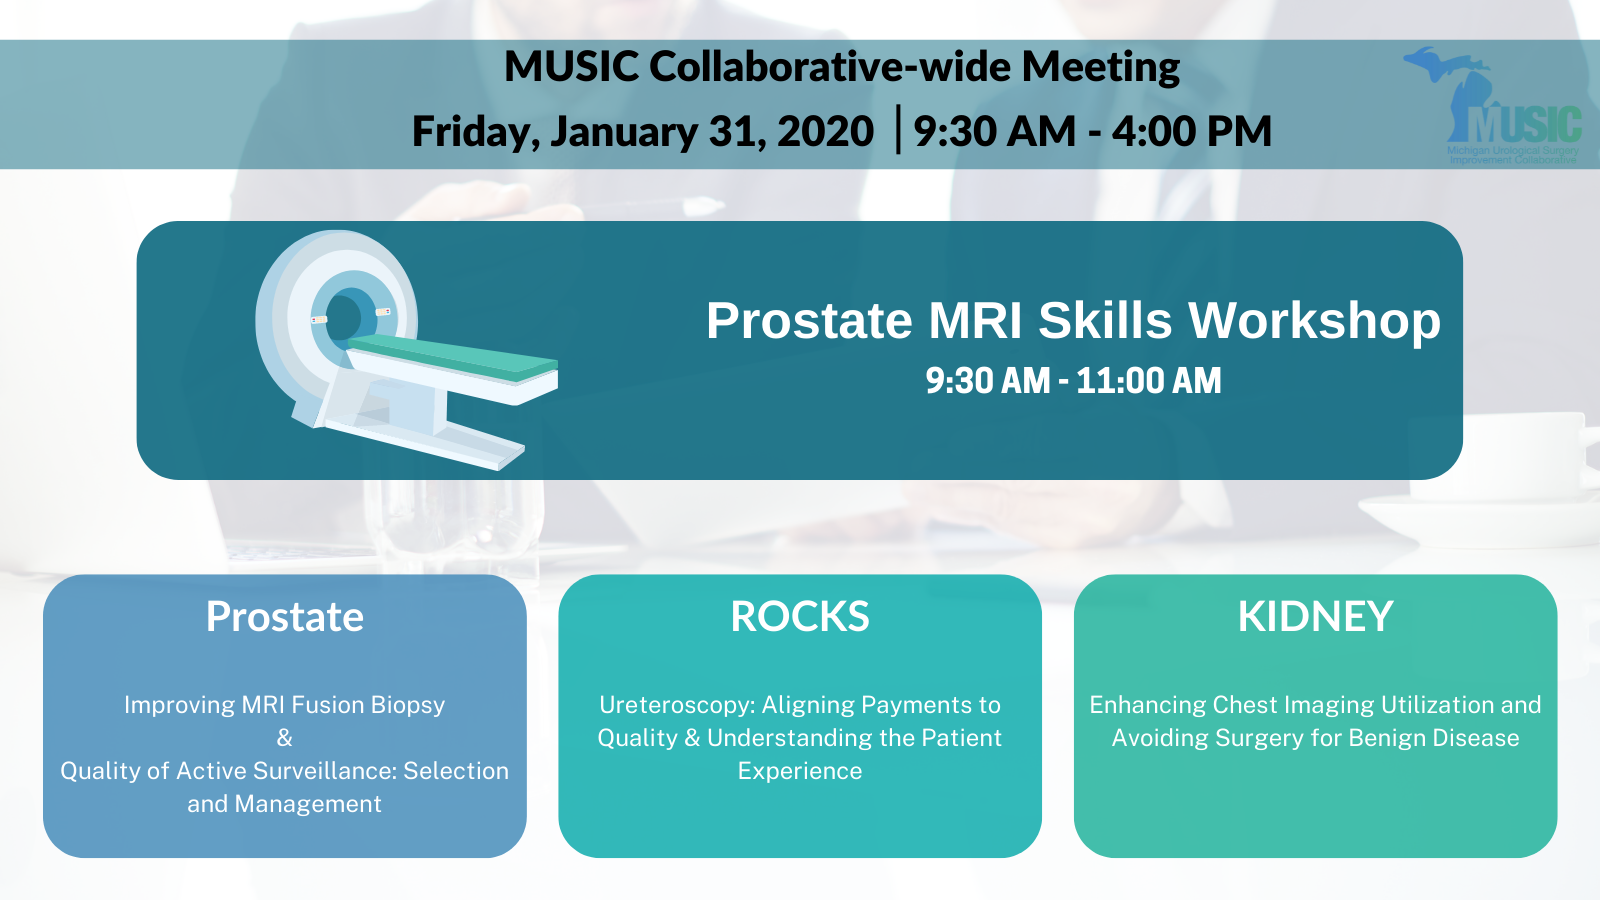 MUSIC Collaborative-wide Meeting